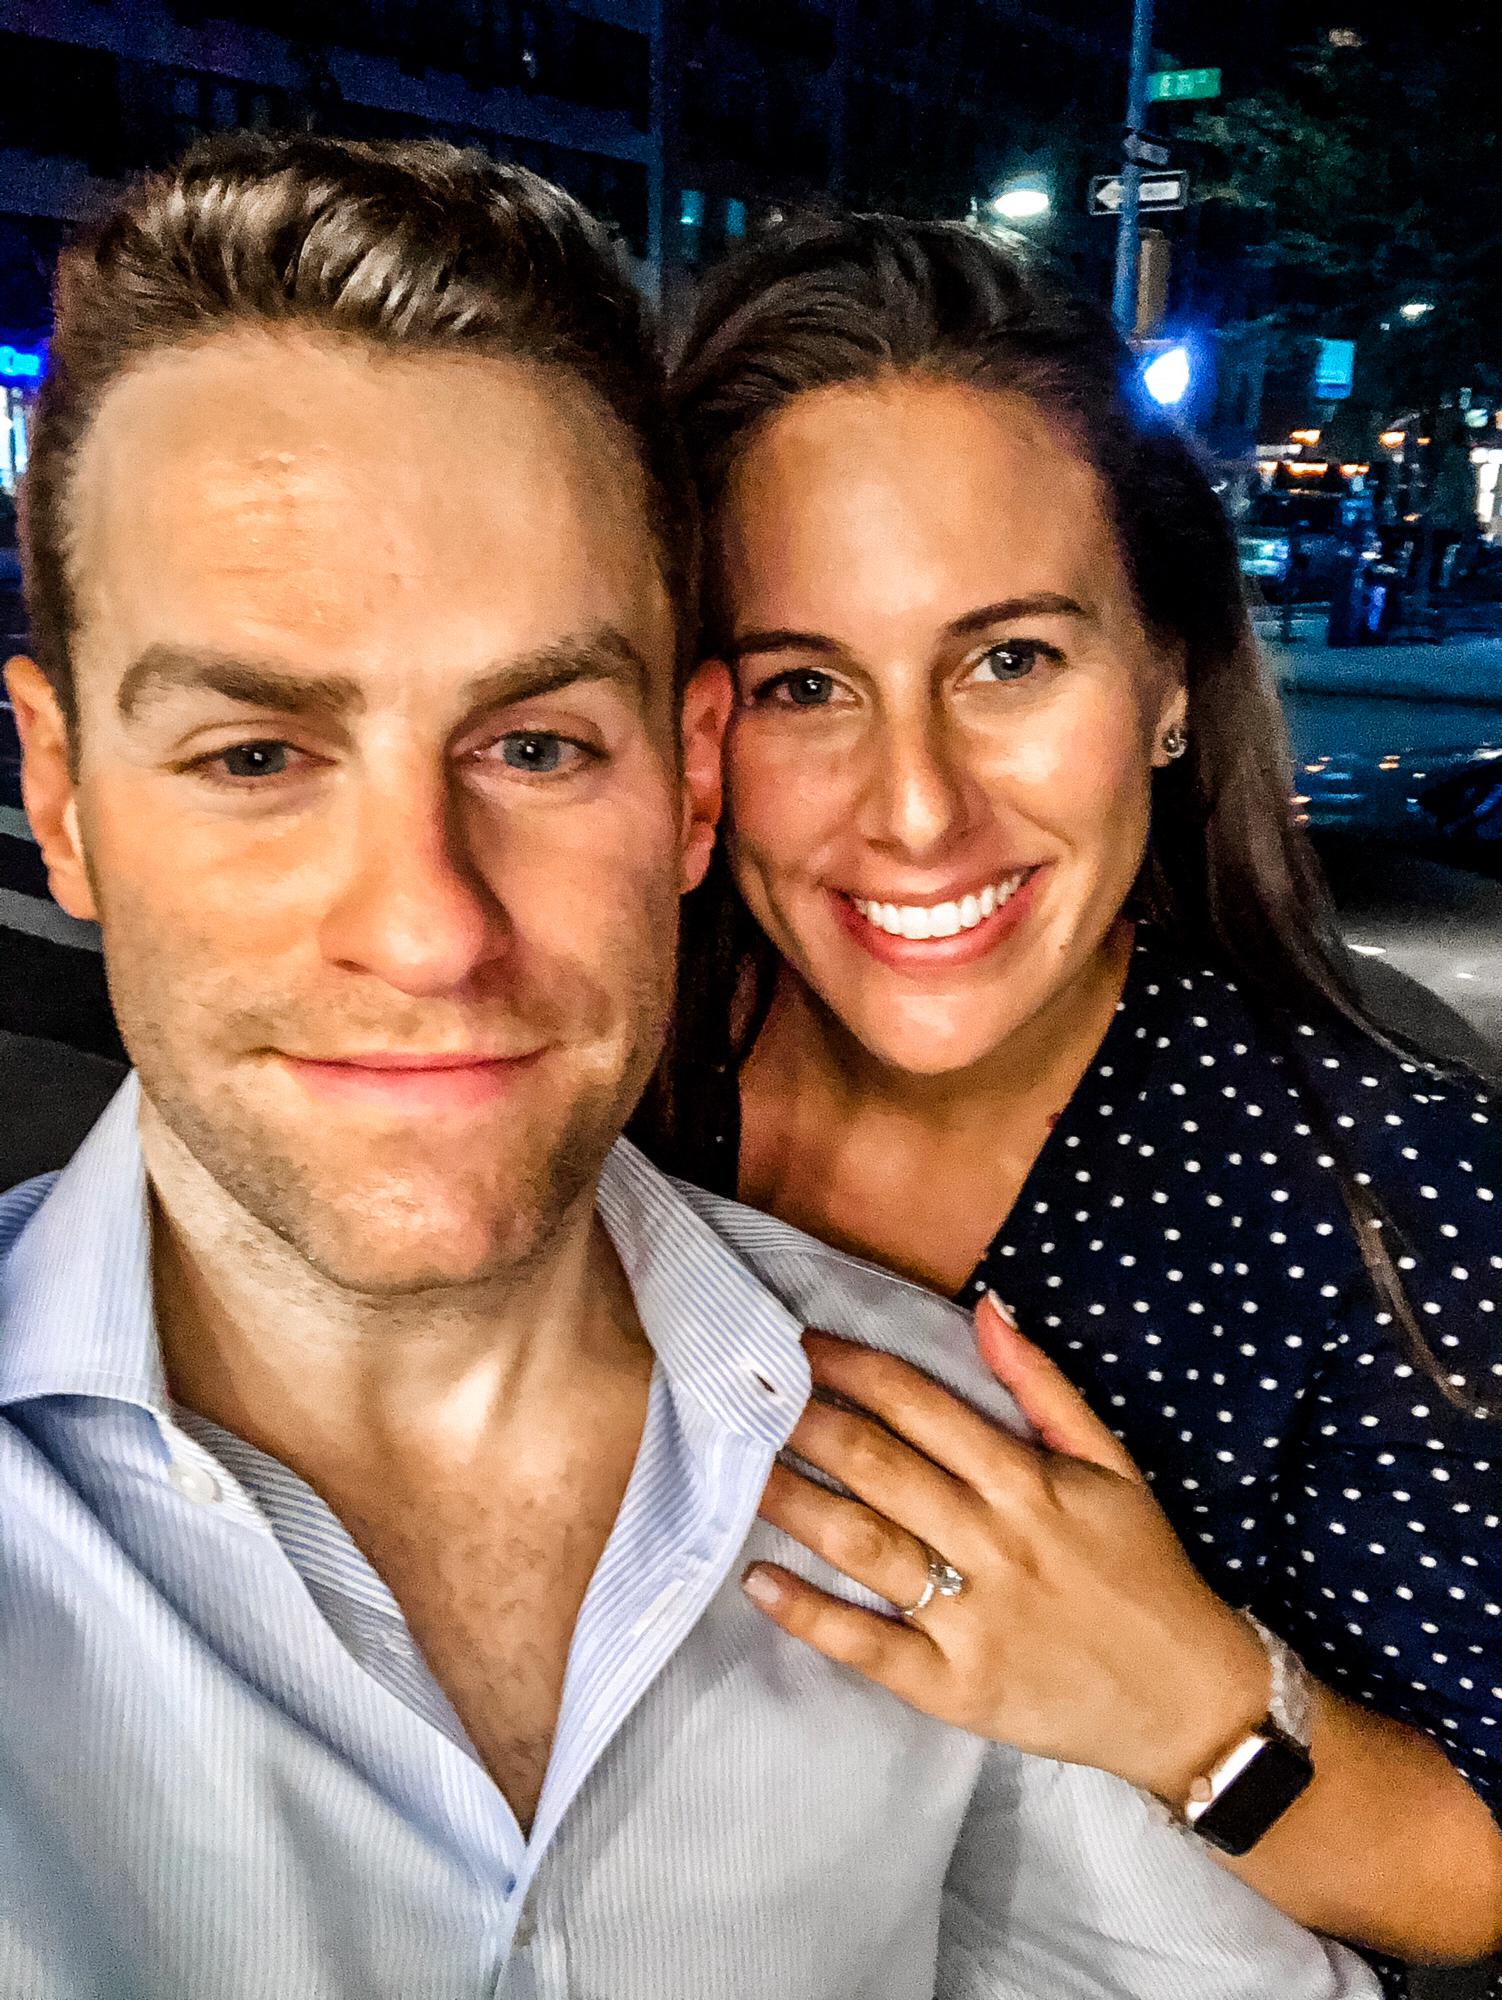 The night we got engaged. A selfie outside of our building!